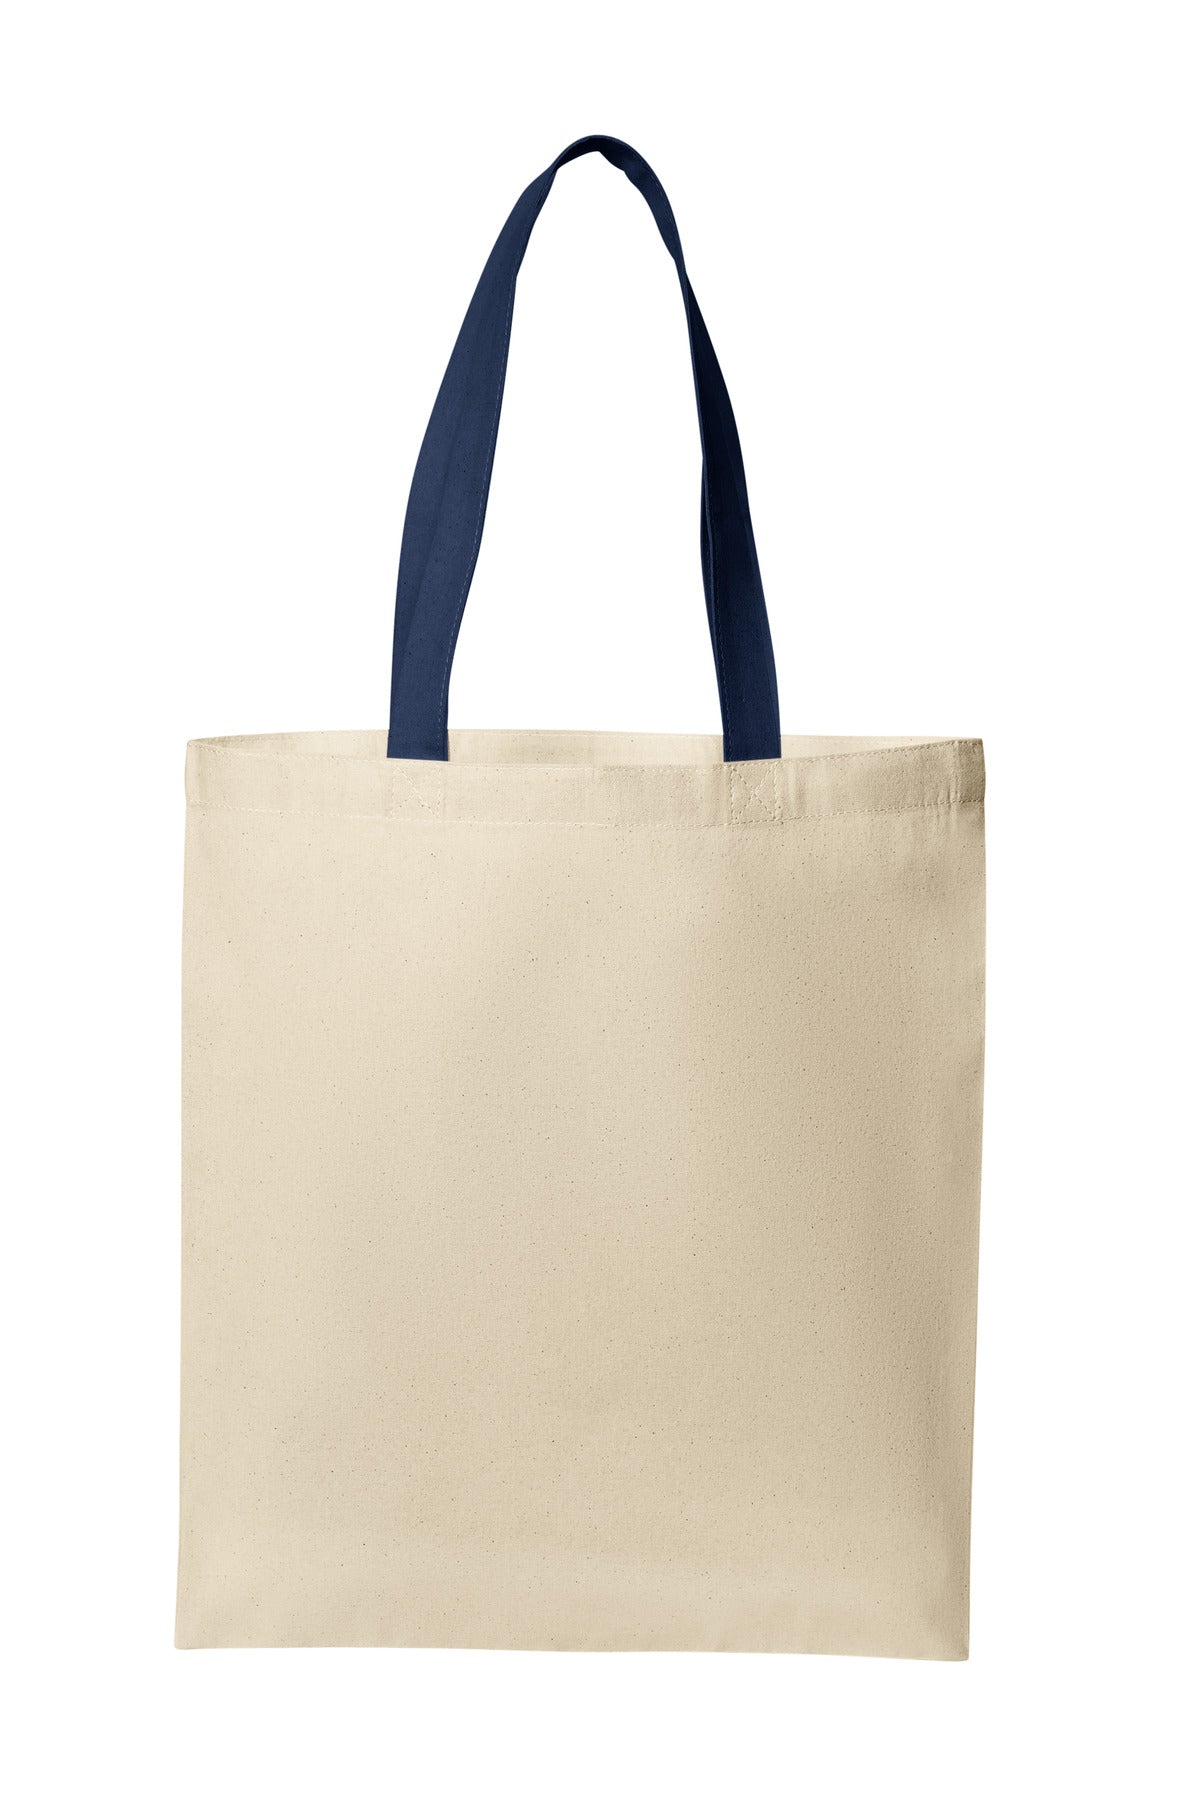 Bags Natural/ River Blue Navy OSFA Port Authority